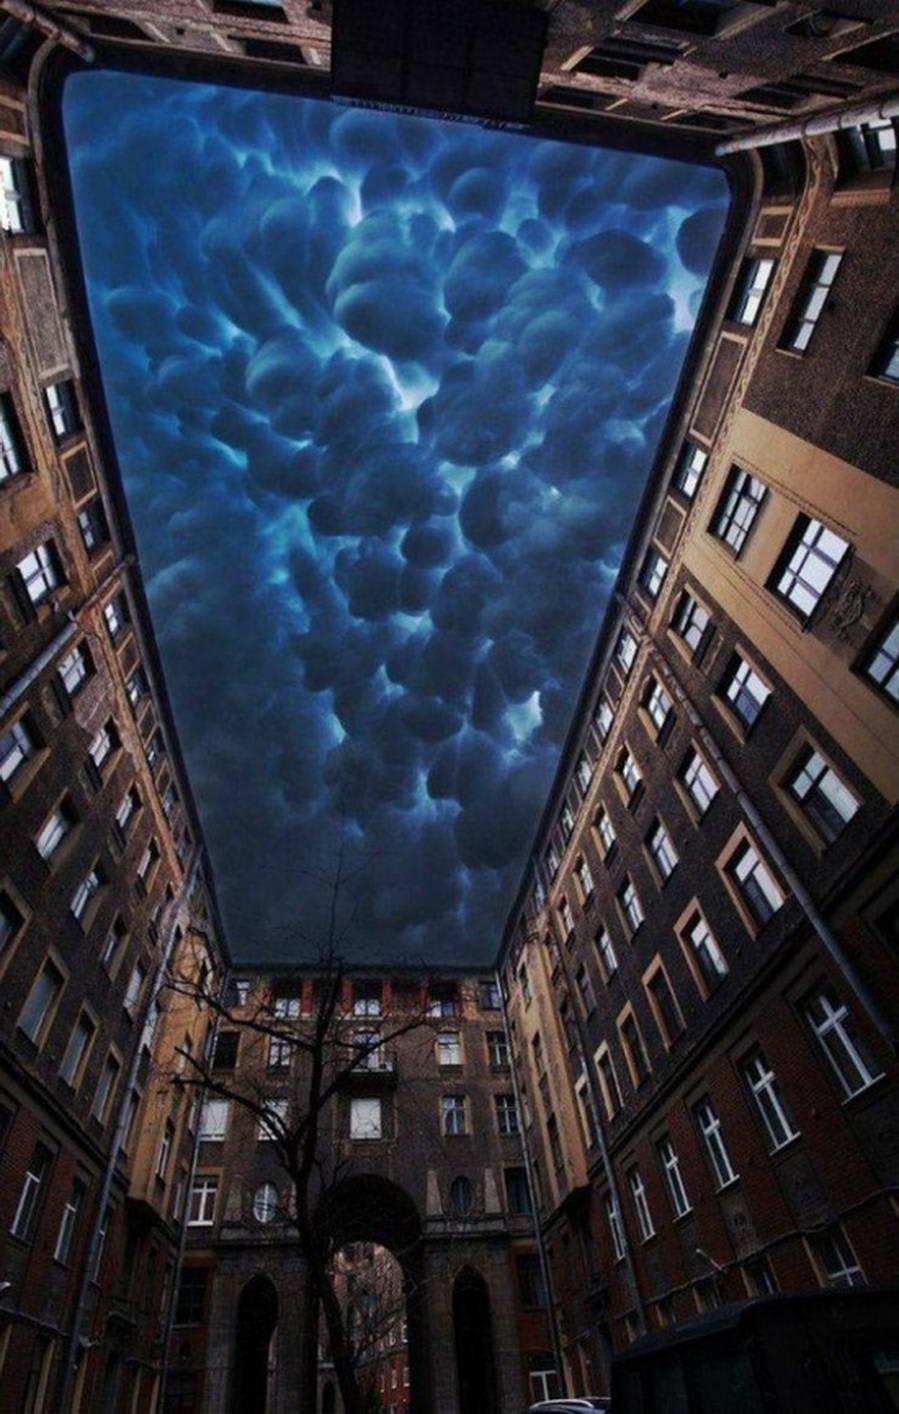 This incredible view of mammatus clouds from Tolstoy House in St. Petersburg